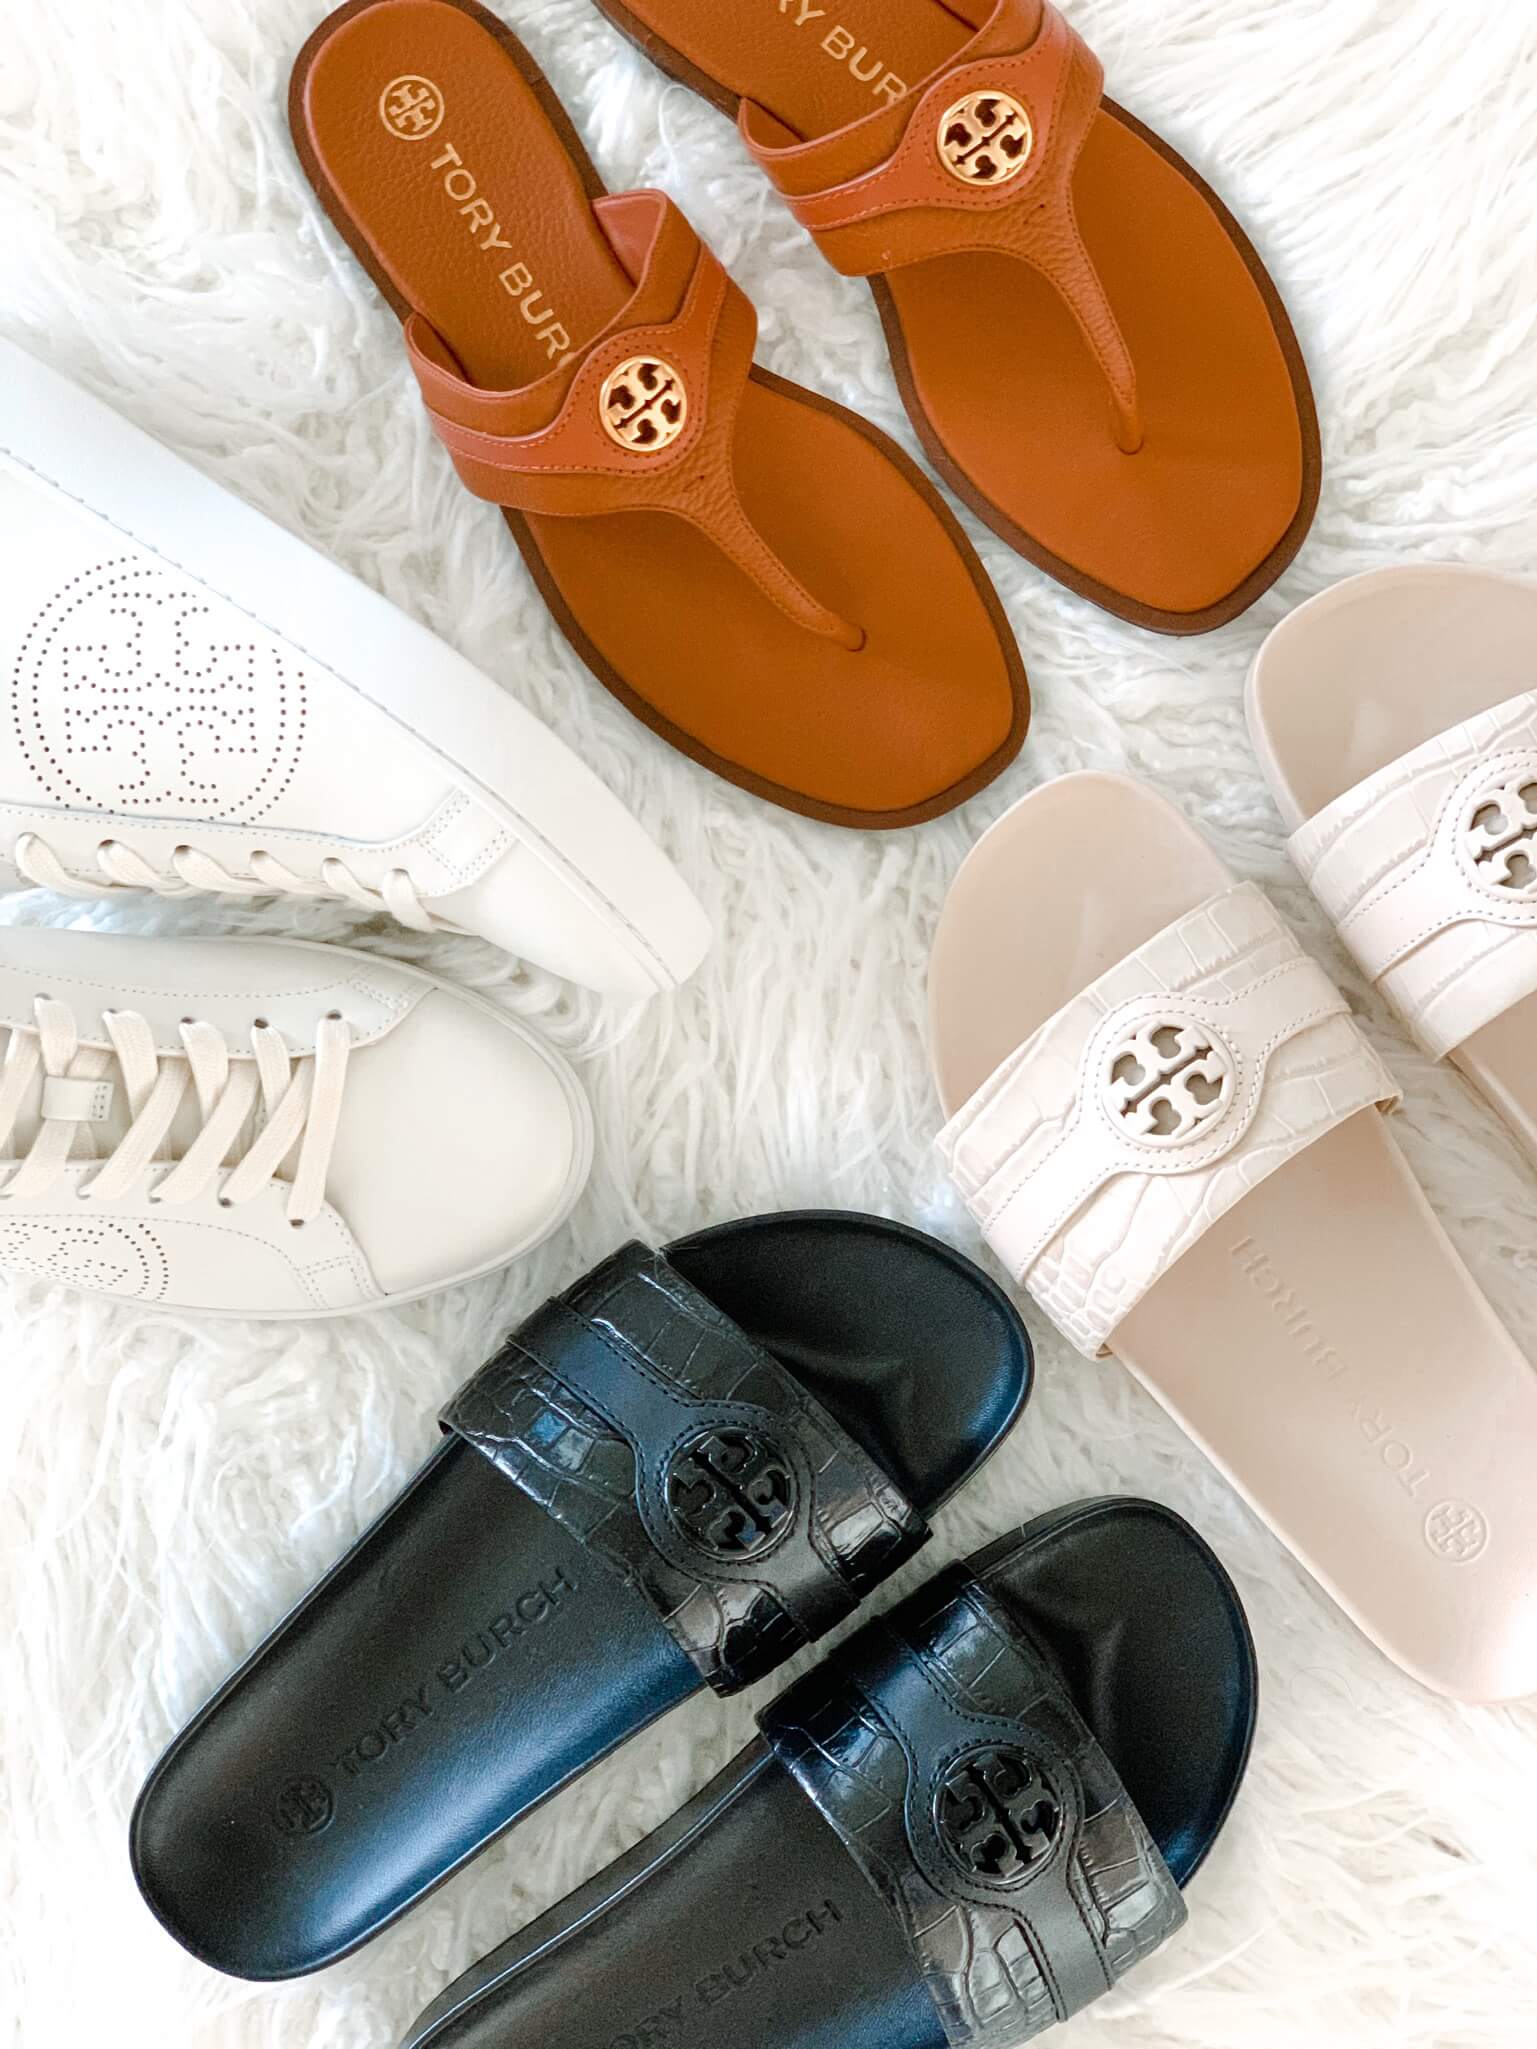 Tory Burch NSALE Review | Open Access Starts Tomorrow! - The Double Take  Girls